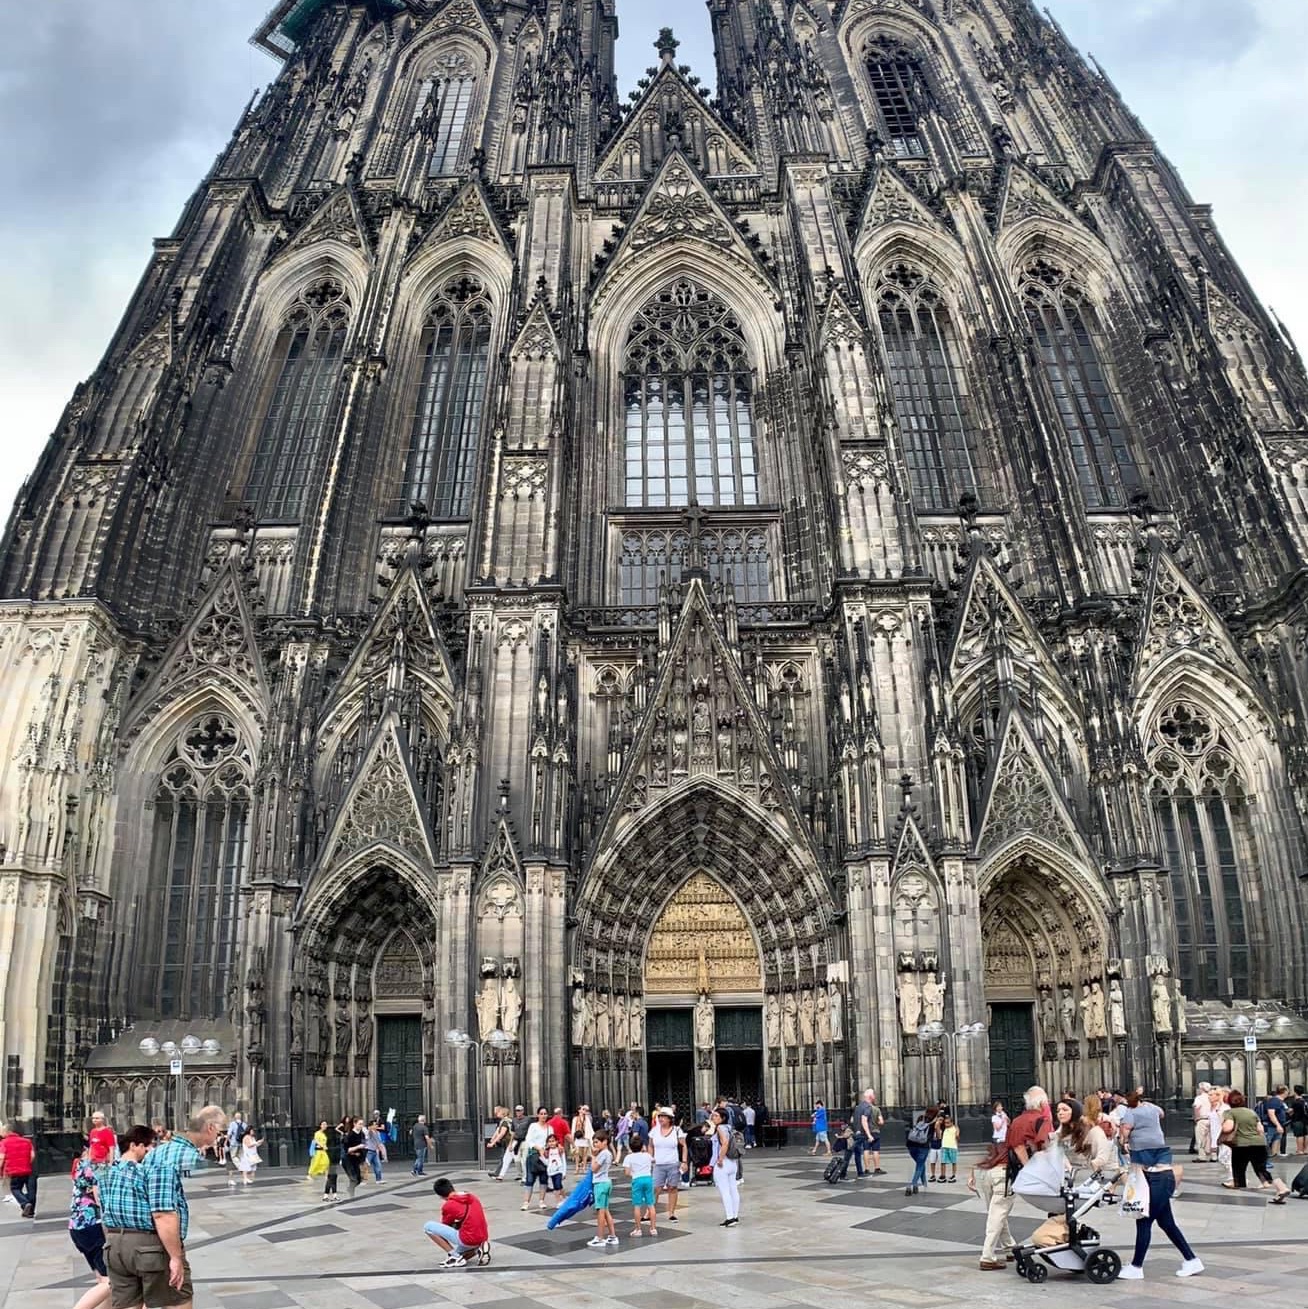 Cologne Cathedral attraction reviews - Cologne Cathedral tickets - Cologne  Cathedral discounts - Cologne Cathedral transportation, address, opening  hours - attractions, hotels, and food near Cologne Cathedral - Trip.com